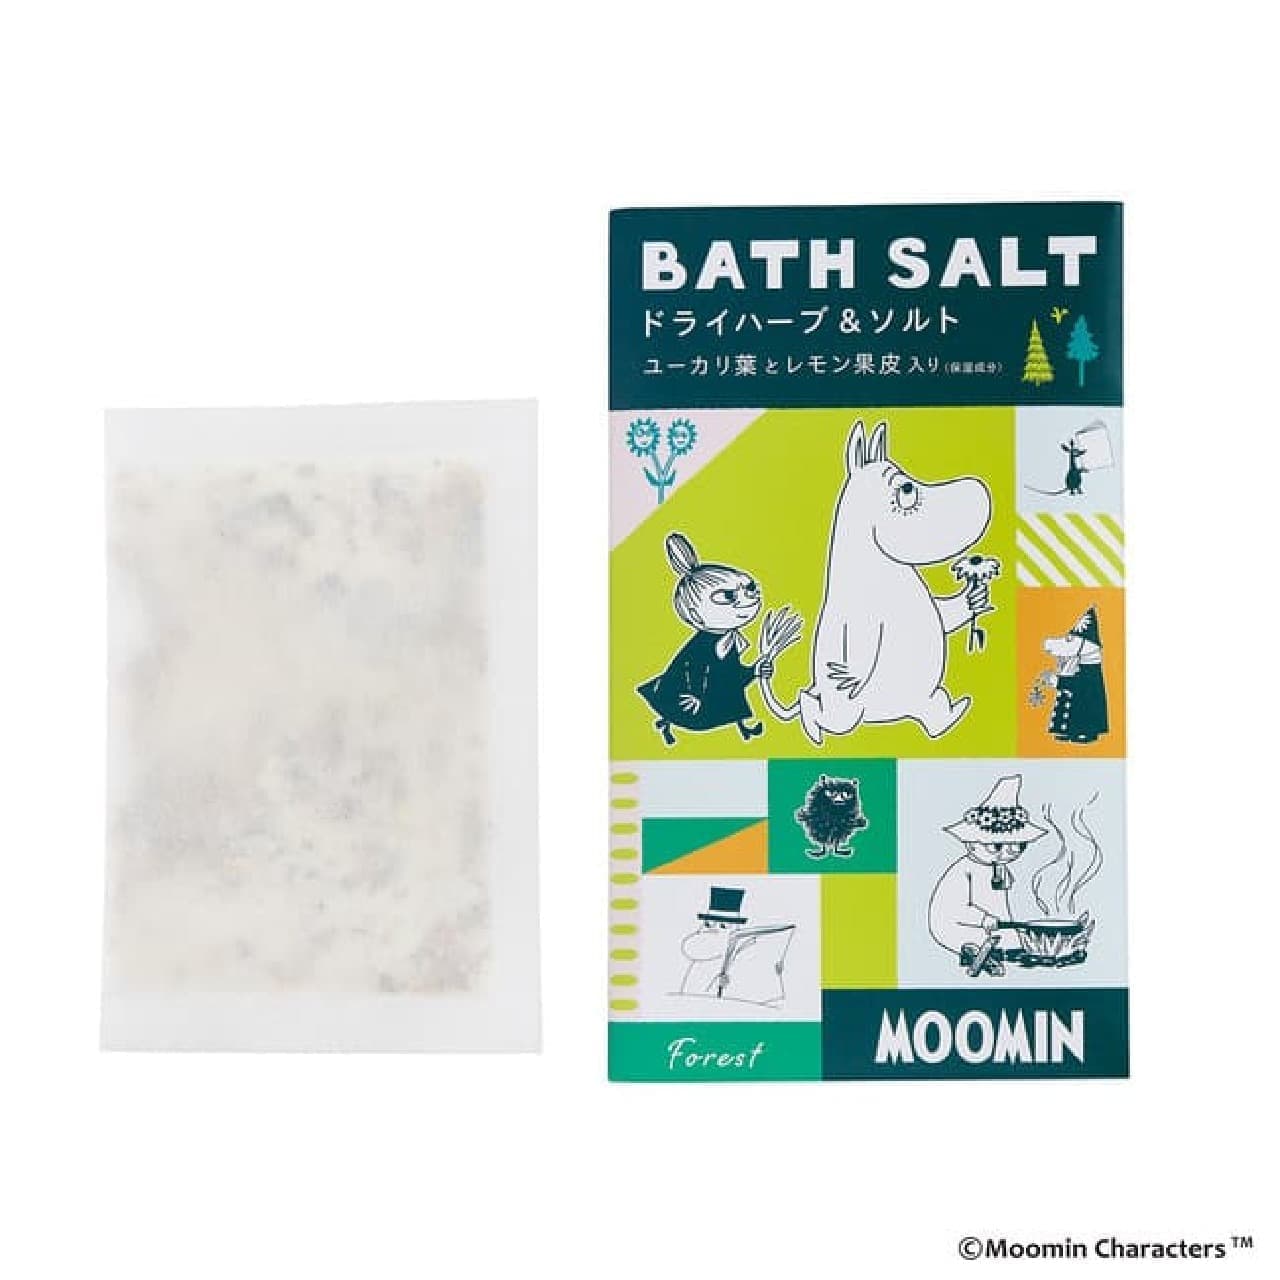 Released "Moomin Lip & Hand Care Set" --with the scent of wild roses and bilberries! Bath salt bag too